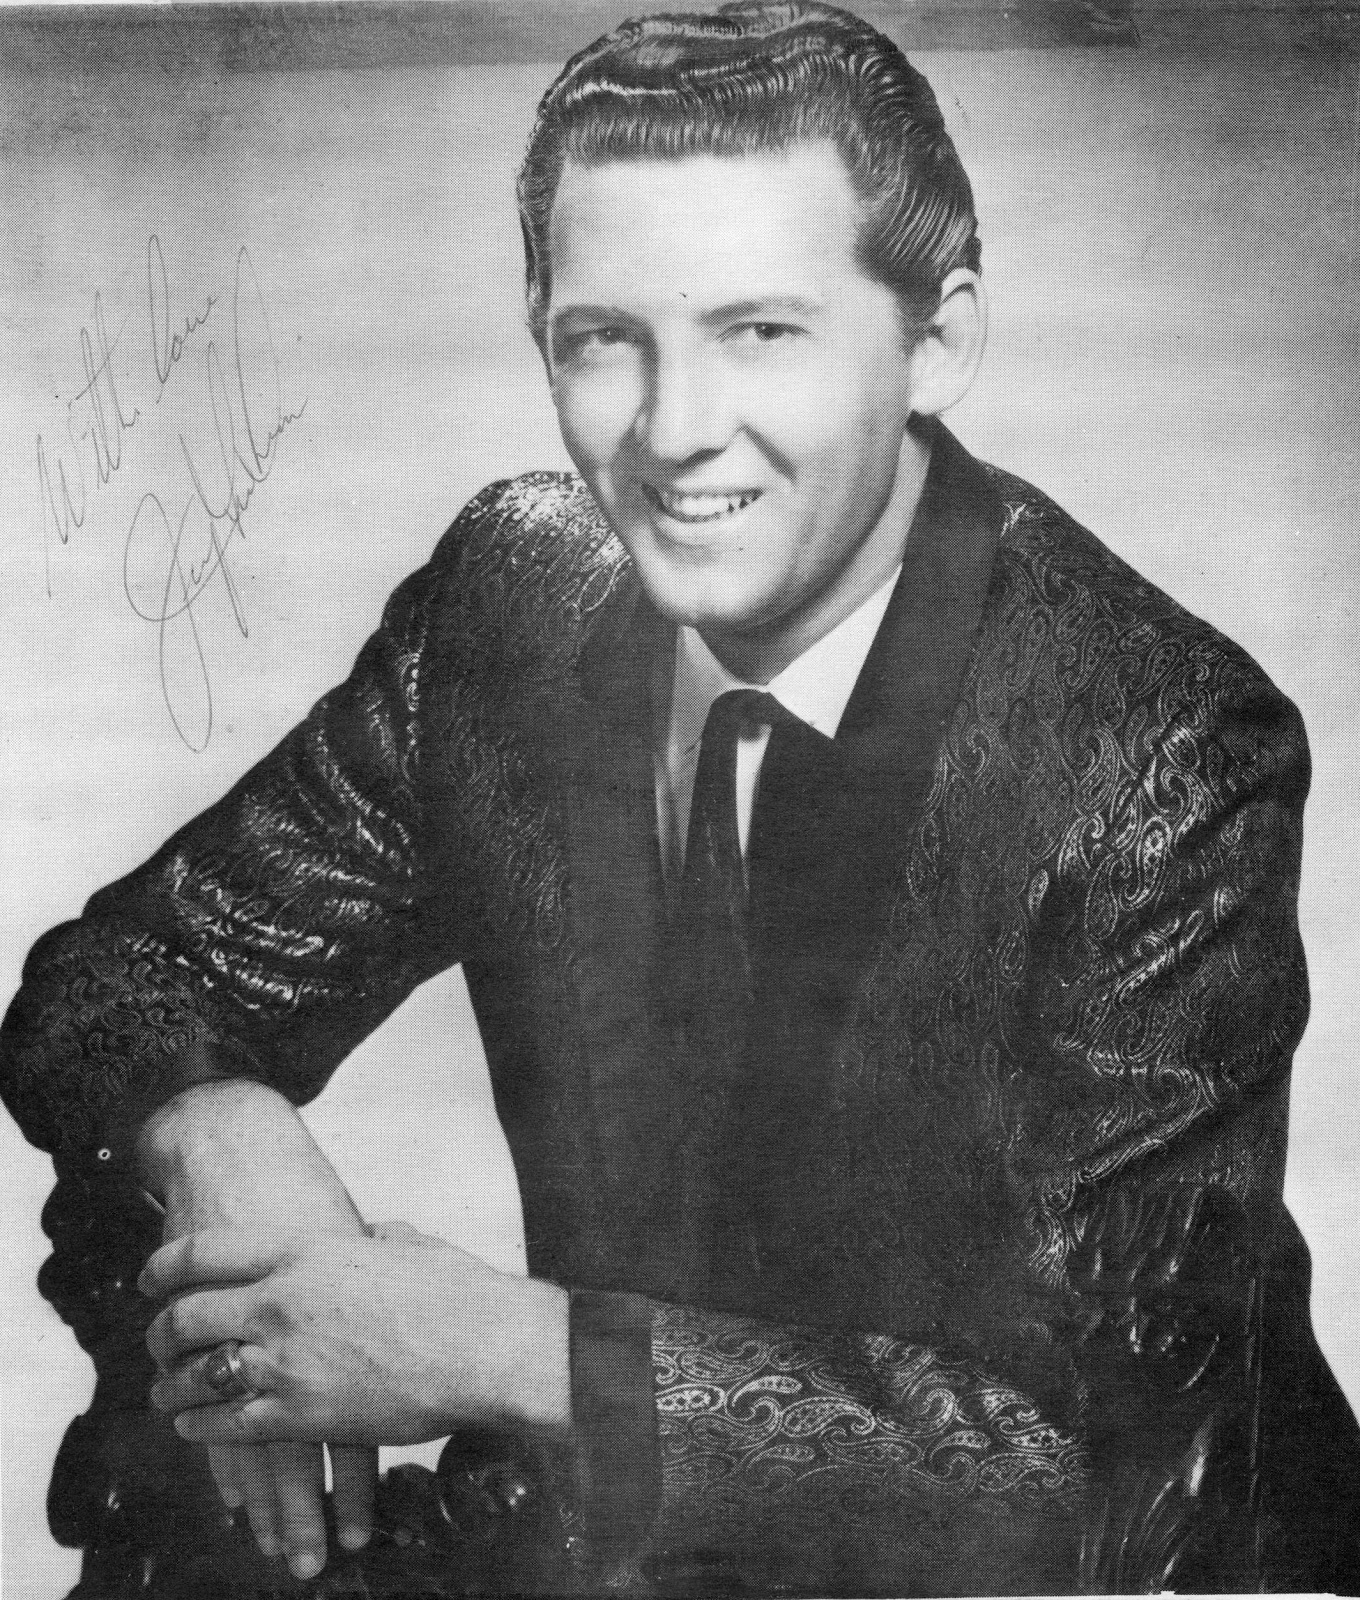 I, too, am here: With Love, Jerry Lee Lewis